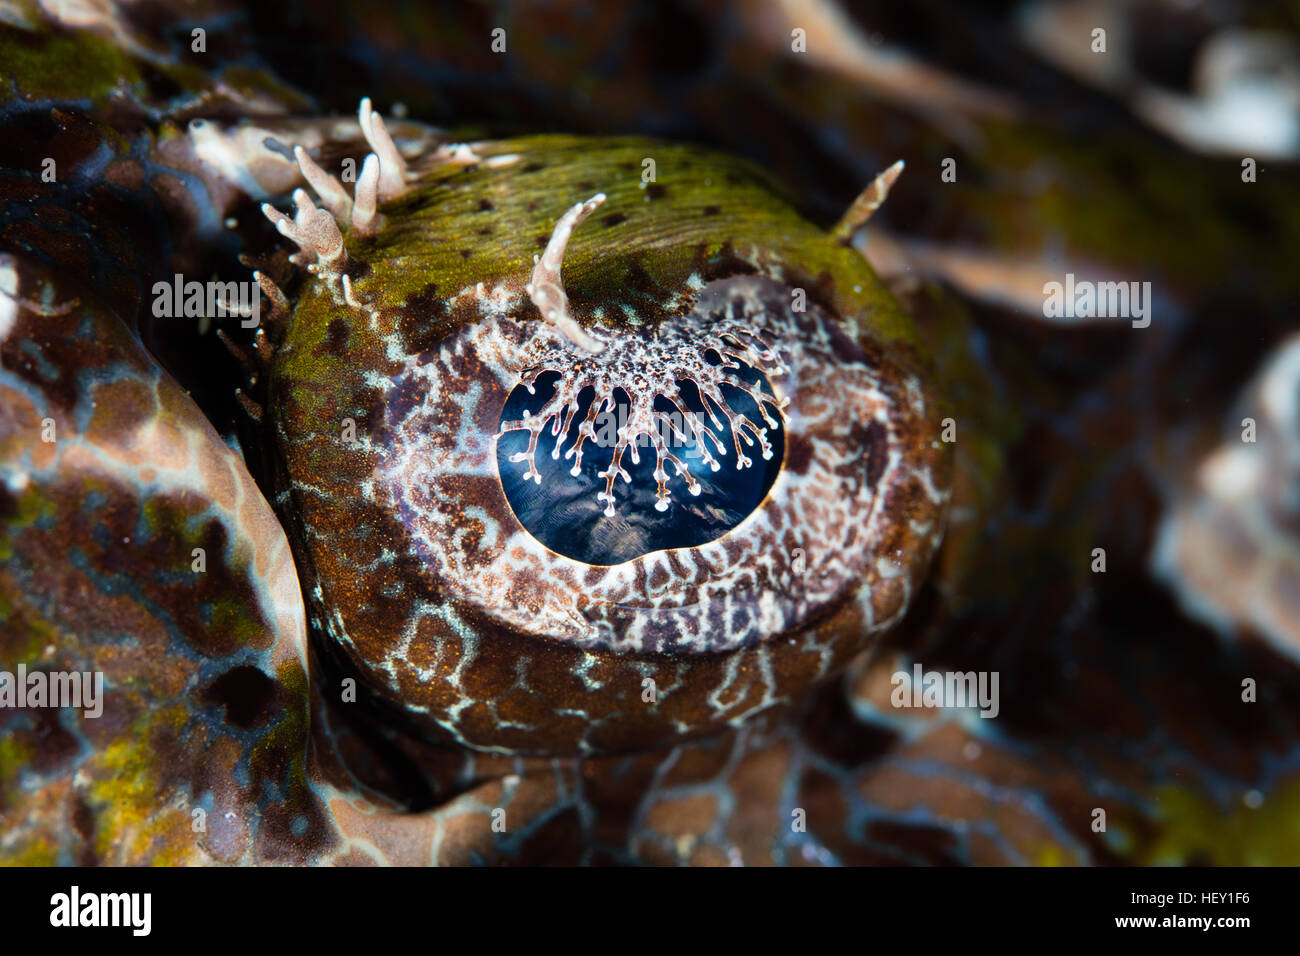 Detail of the eye of a Crocodilefish (Cymbacephalus beauforti). This predator lives on reefs throughout the Indo-Pacific region. Stock Photo